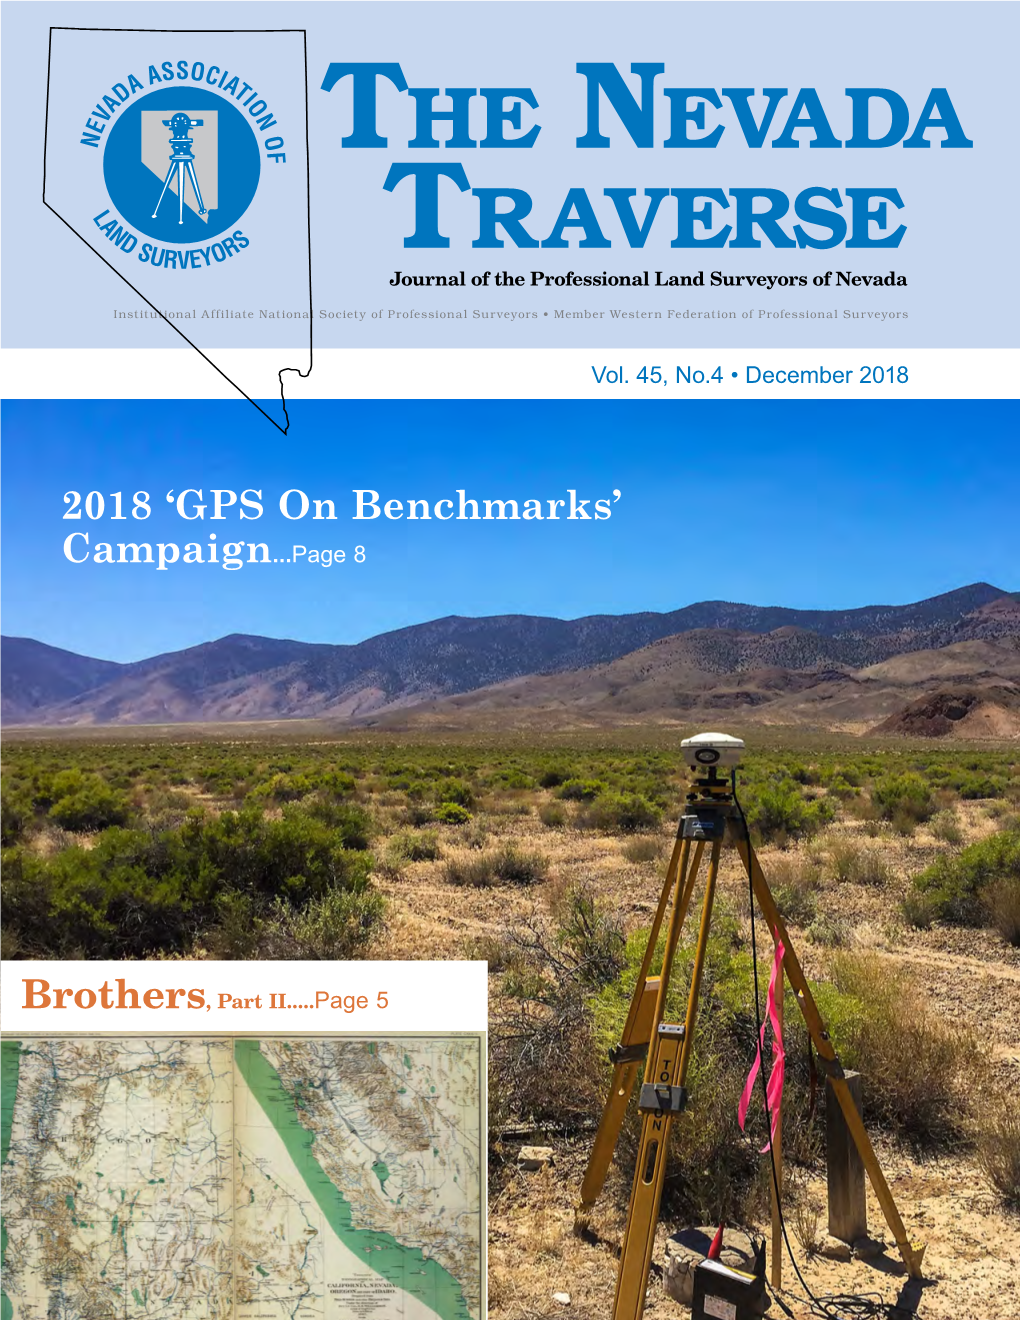 The Nevada Traverse Journal of the Professional Land Surveyors of Nevada